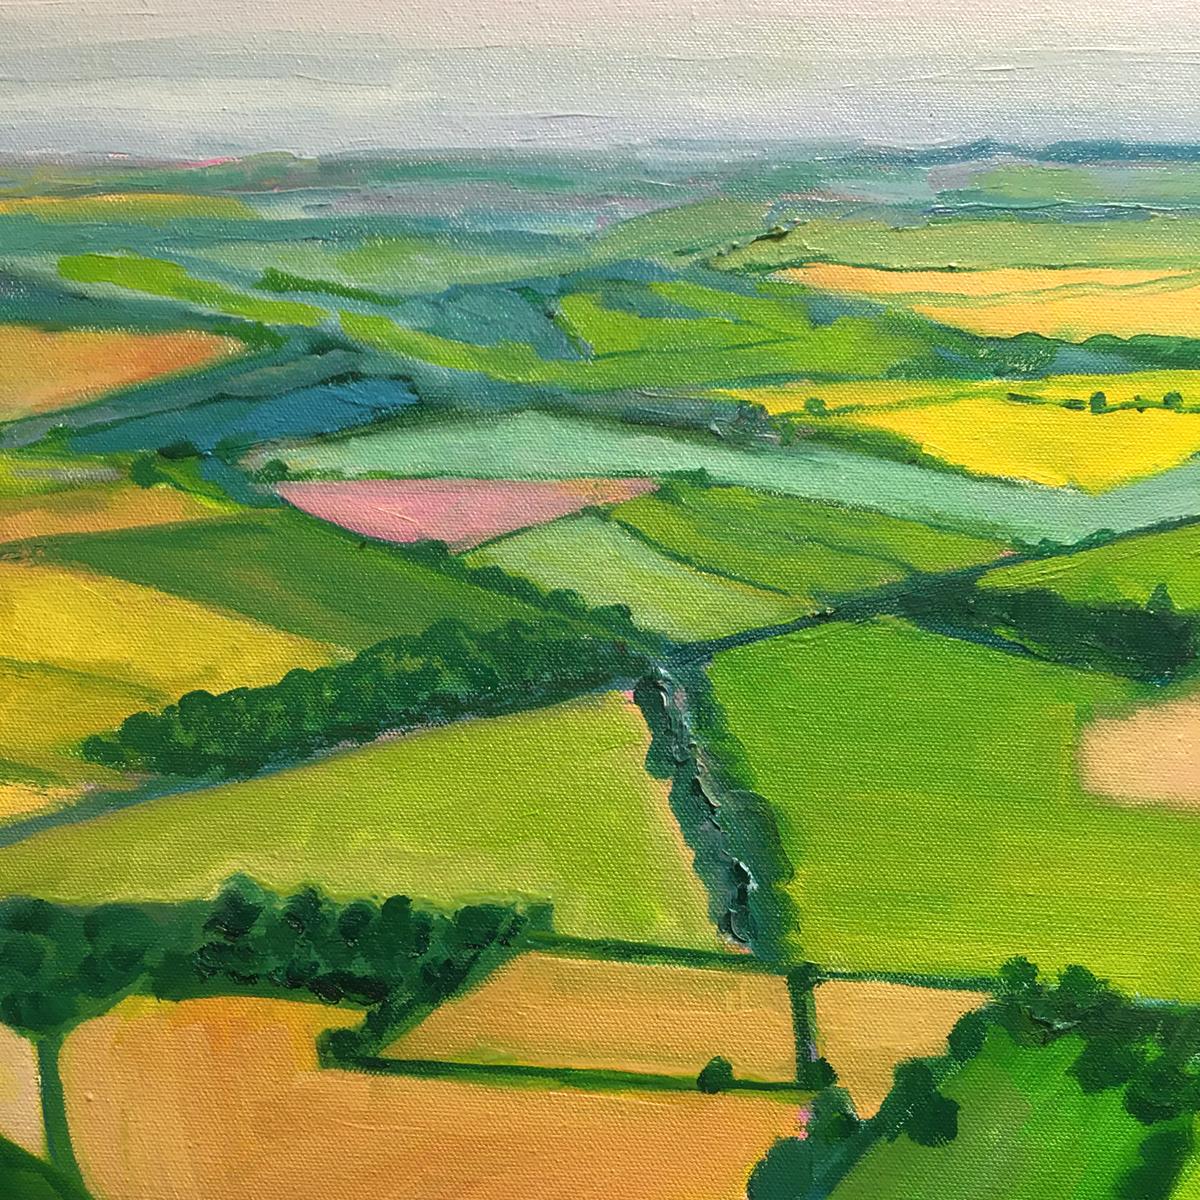 Aerial view of the Cotswolds is an Original Painting by Eleanor Woolley. This painting is inspired by walks around the Cotswolds this Autumn. Many sketches around Chipping Camden and Cirencester in particular were taken to produce this aerial like